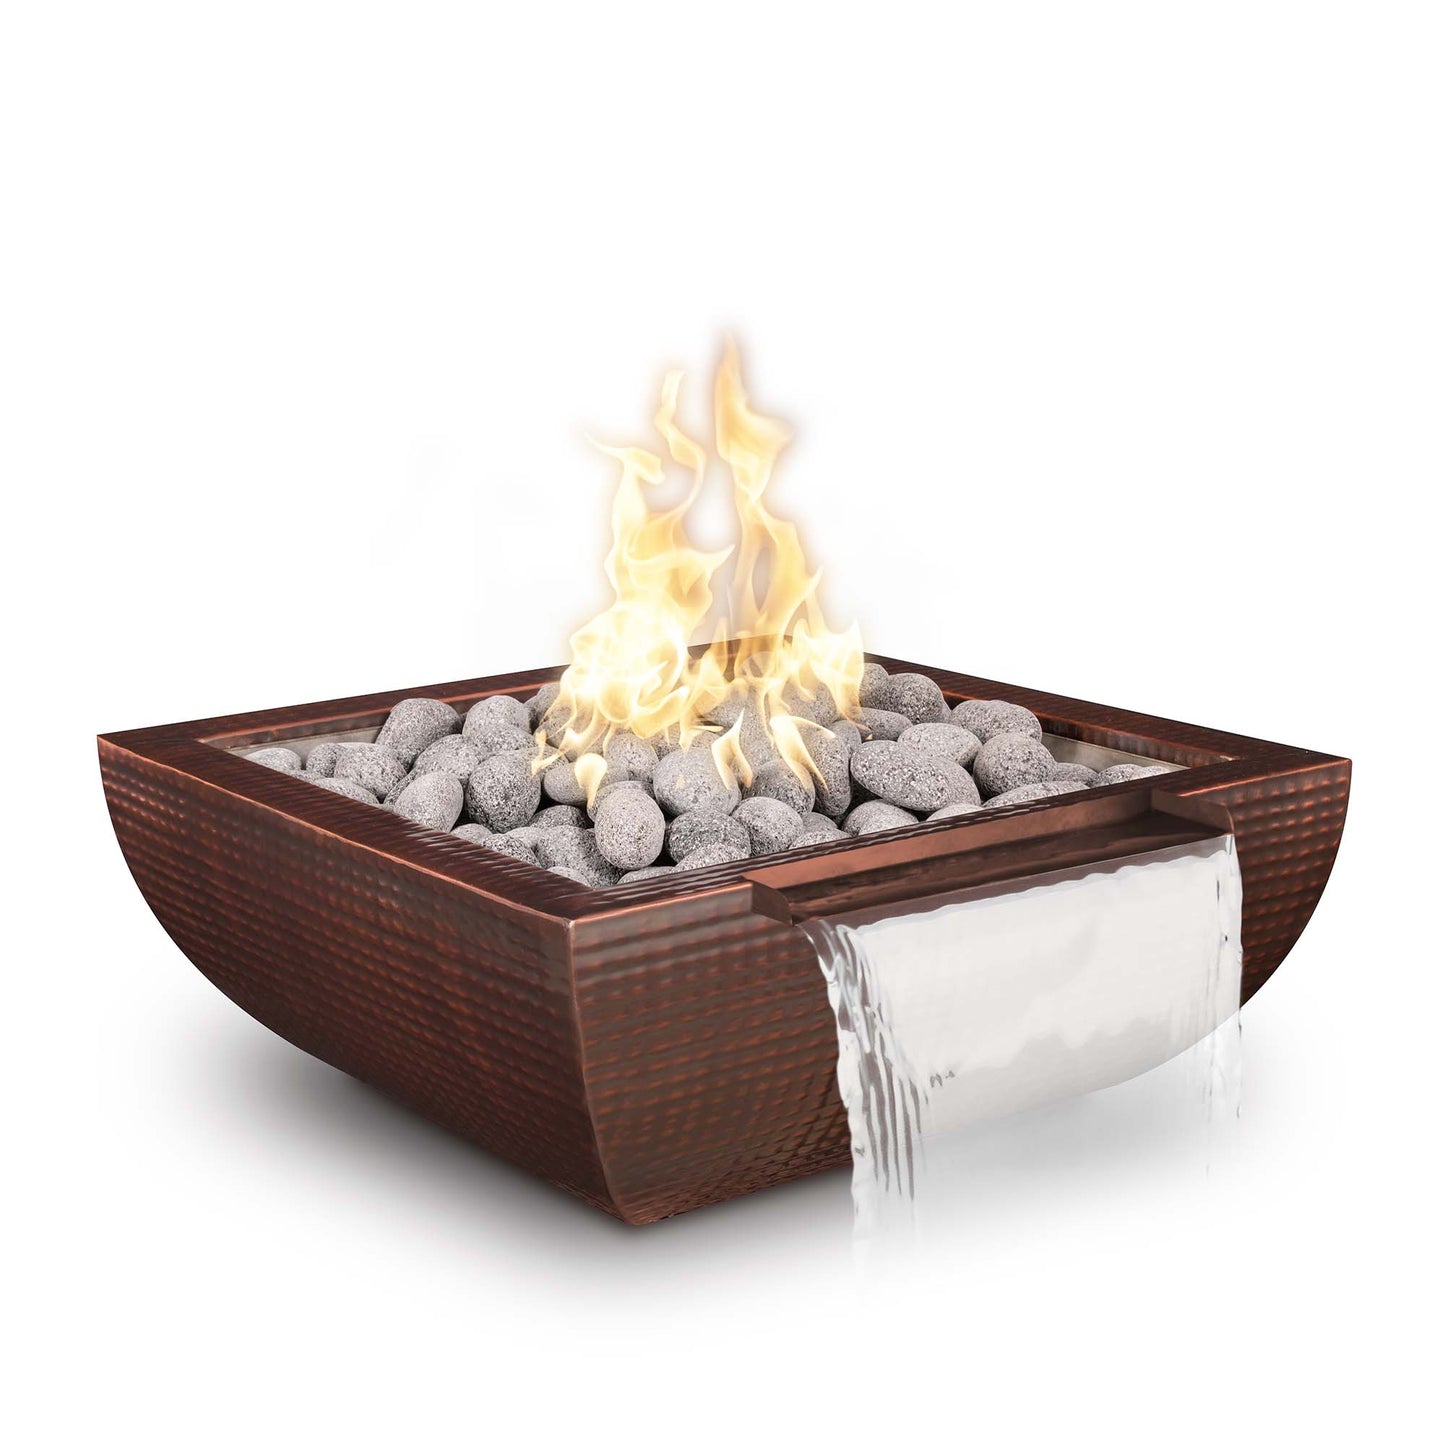 The Outdoor Plus Avalon Wide Spill 24" Gray Powder Coated Metal Liquid Propane Fire & Water Bowl with Match Lit Ignition